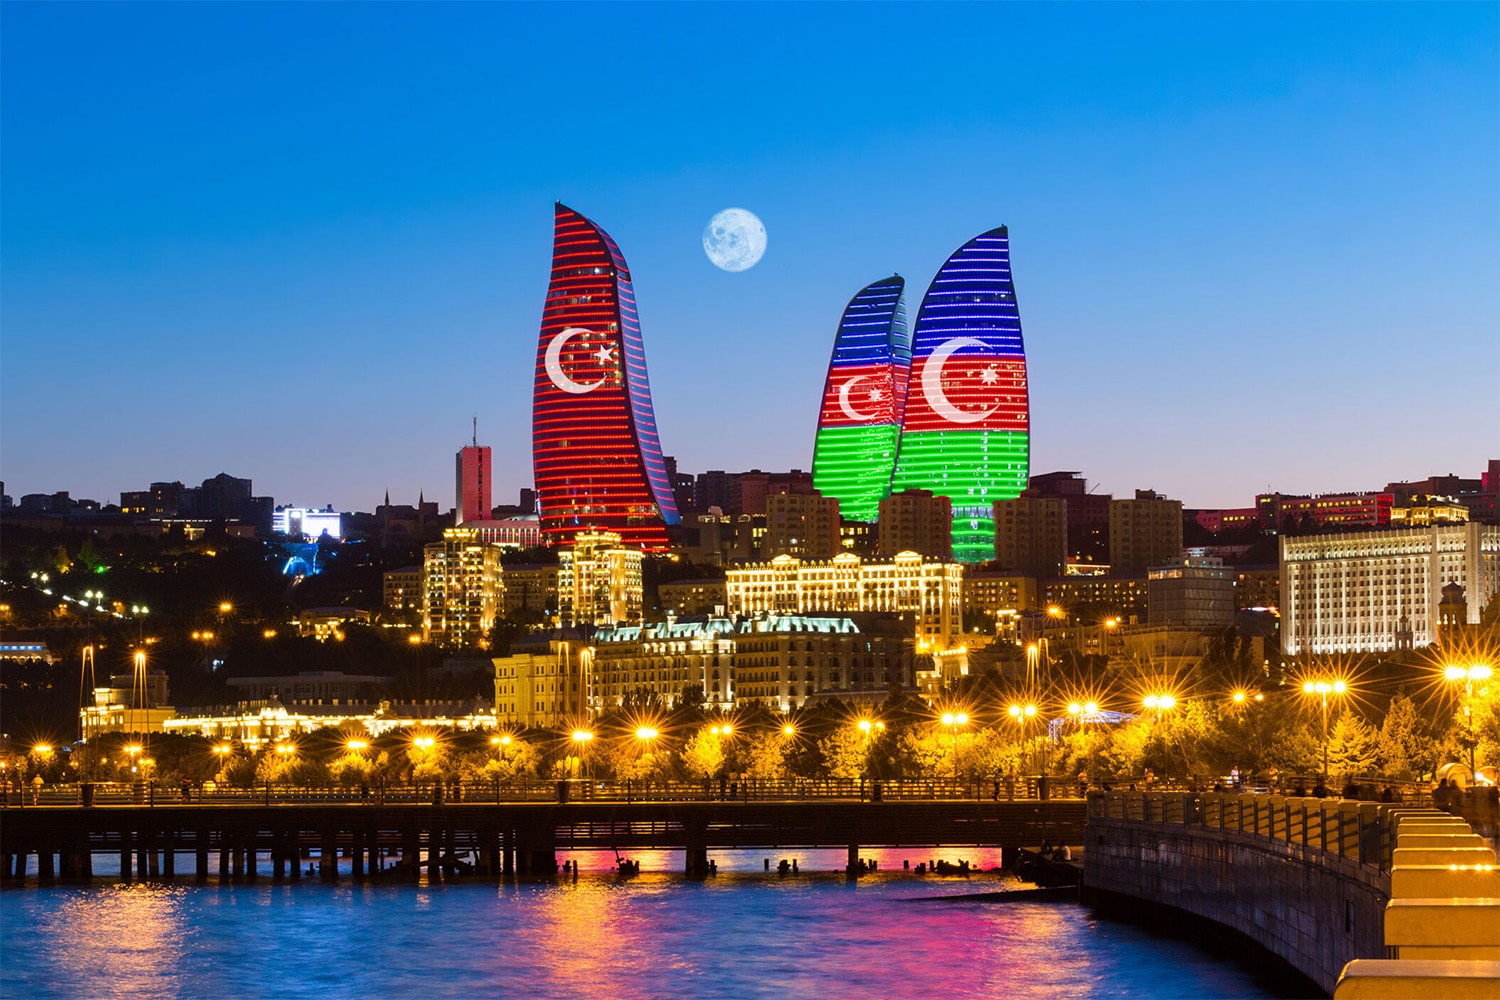 30 interesting facts about Azerbaijan